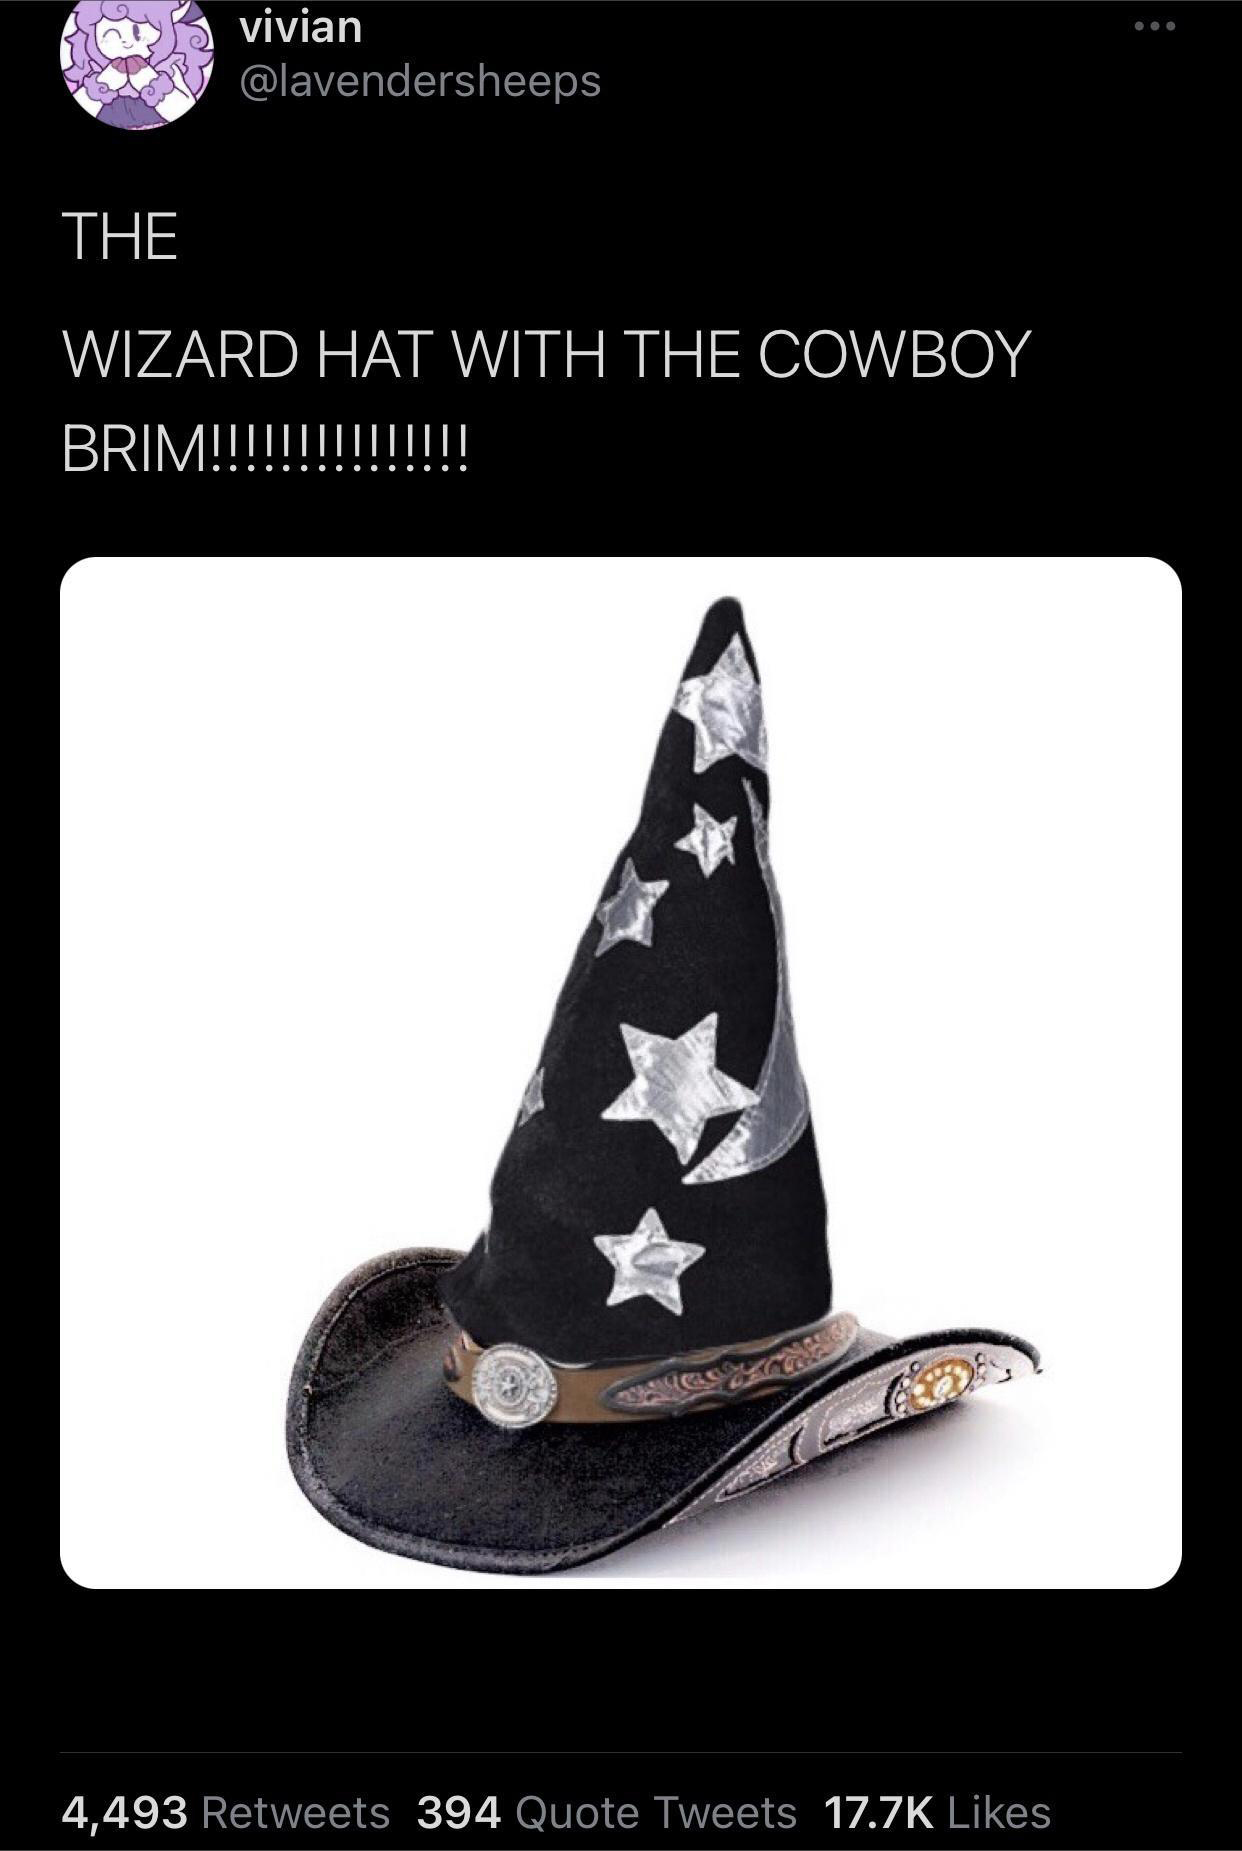 hilarious memes - dank memes - wizard hat with cowboy brim - vivian The Wizard Hat With The Cowboy Brim!!!.||||||||||!! 4,493 394 Quote Tweets